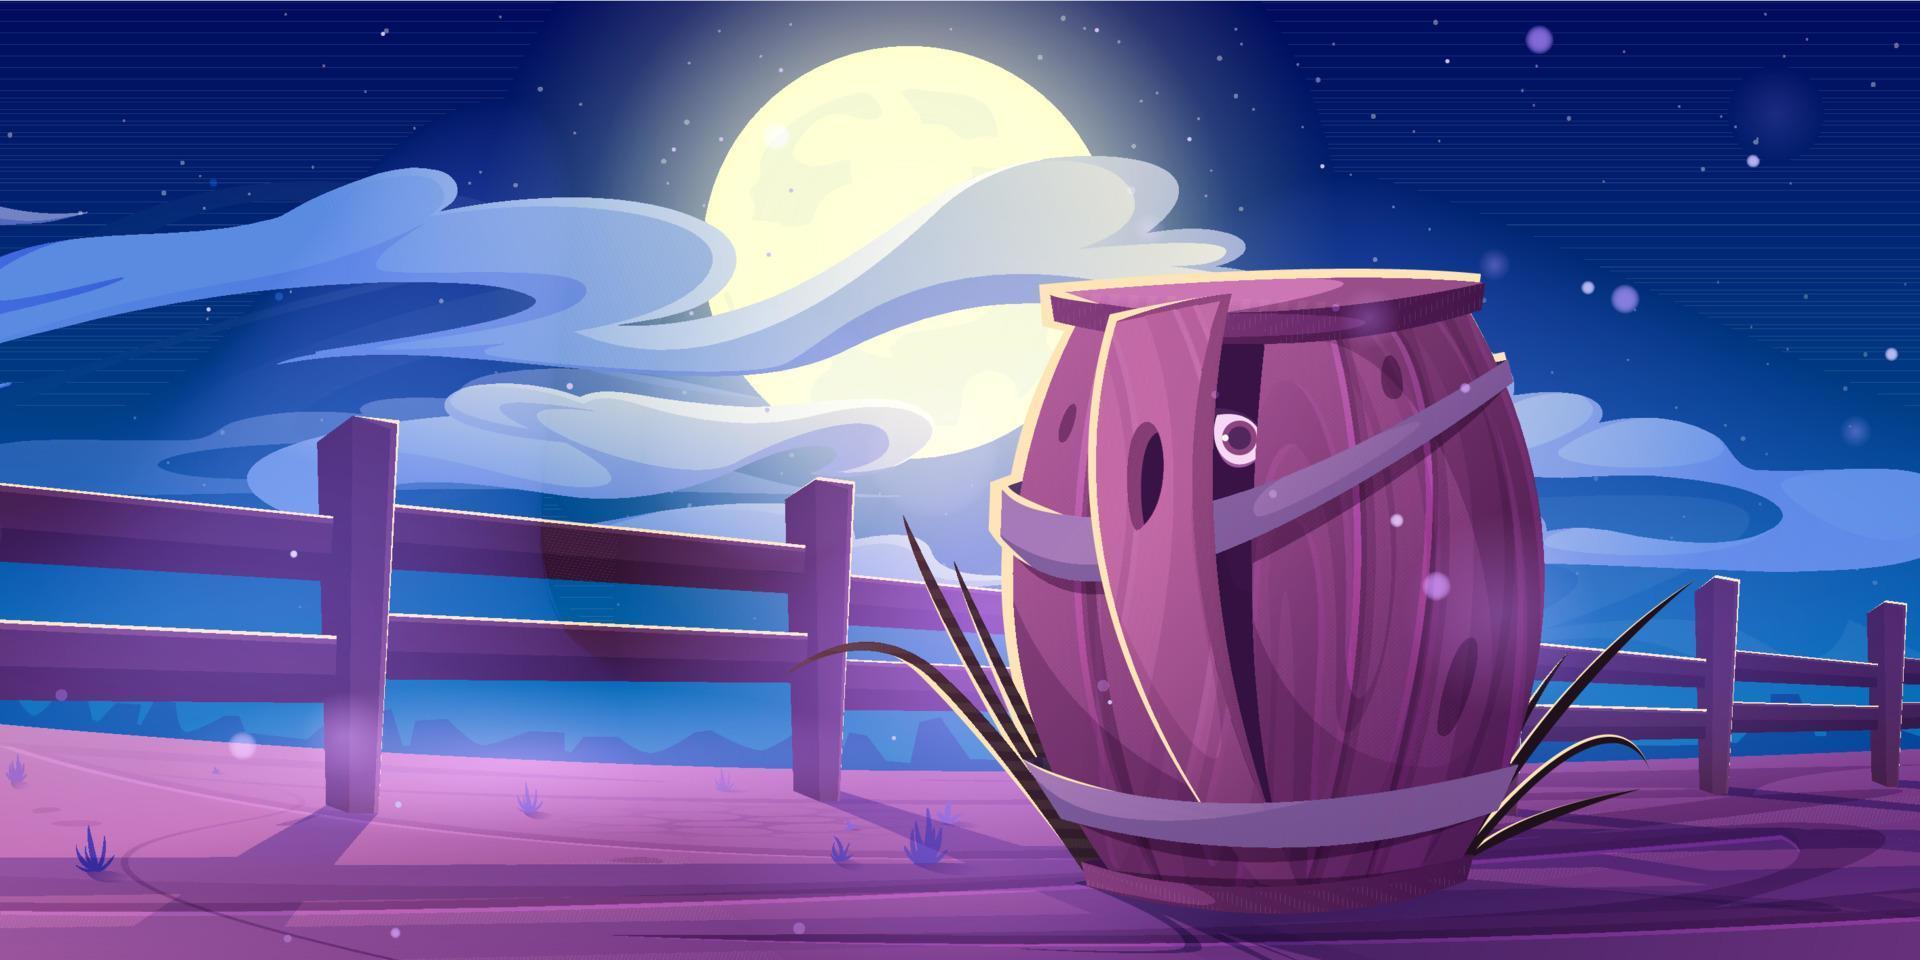 Eye look through the wooden barrel hole at night vector